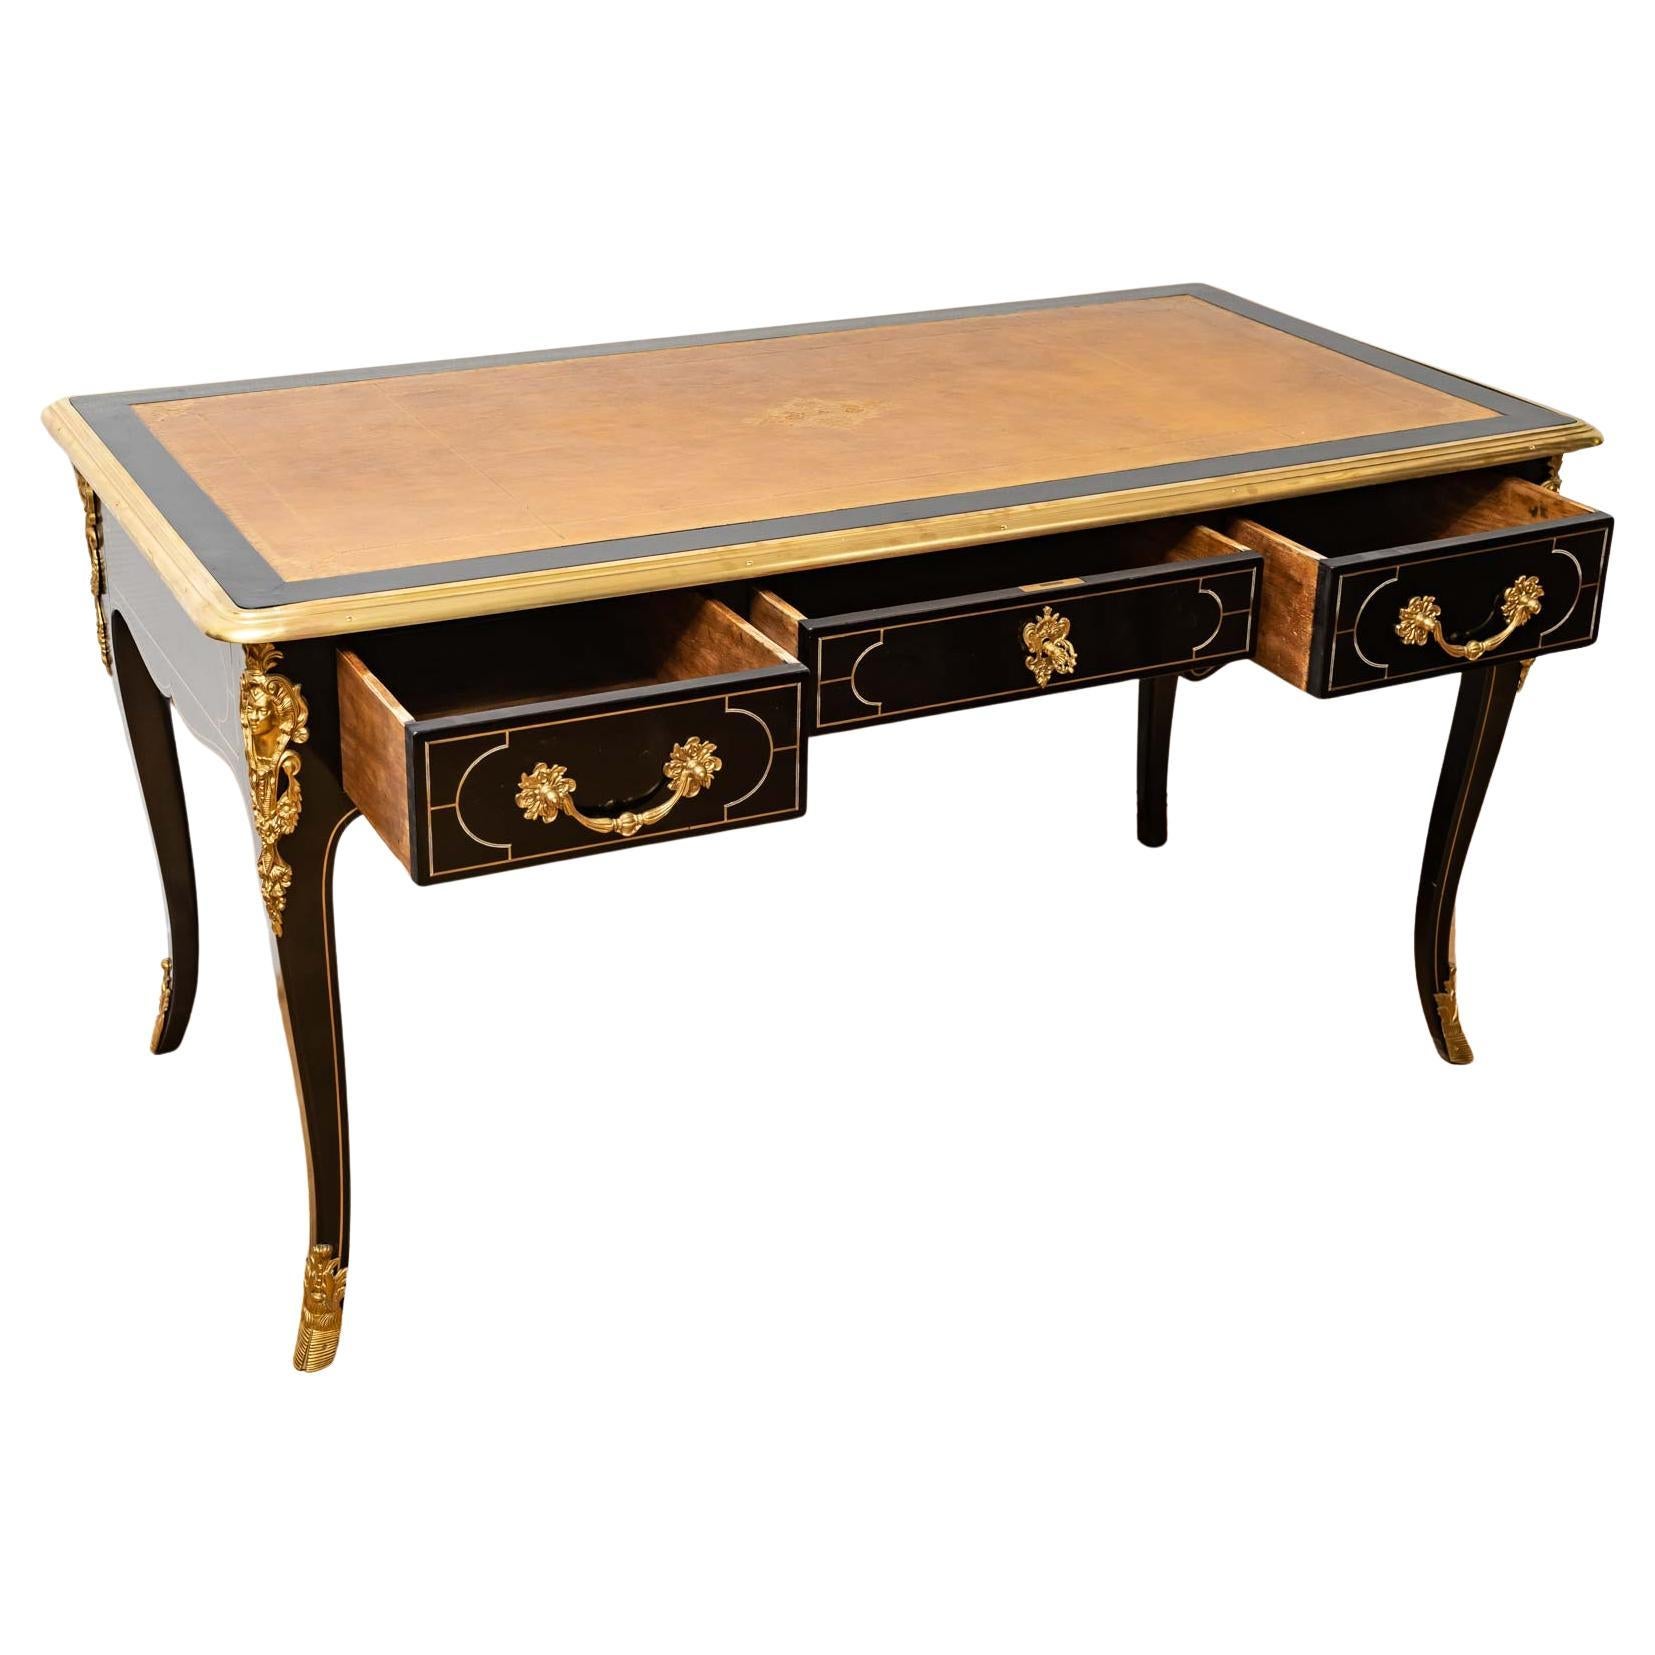 Magnificent Flat Desk in Blackened Wood and Bronzes, Napoleon III Style